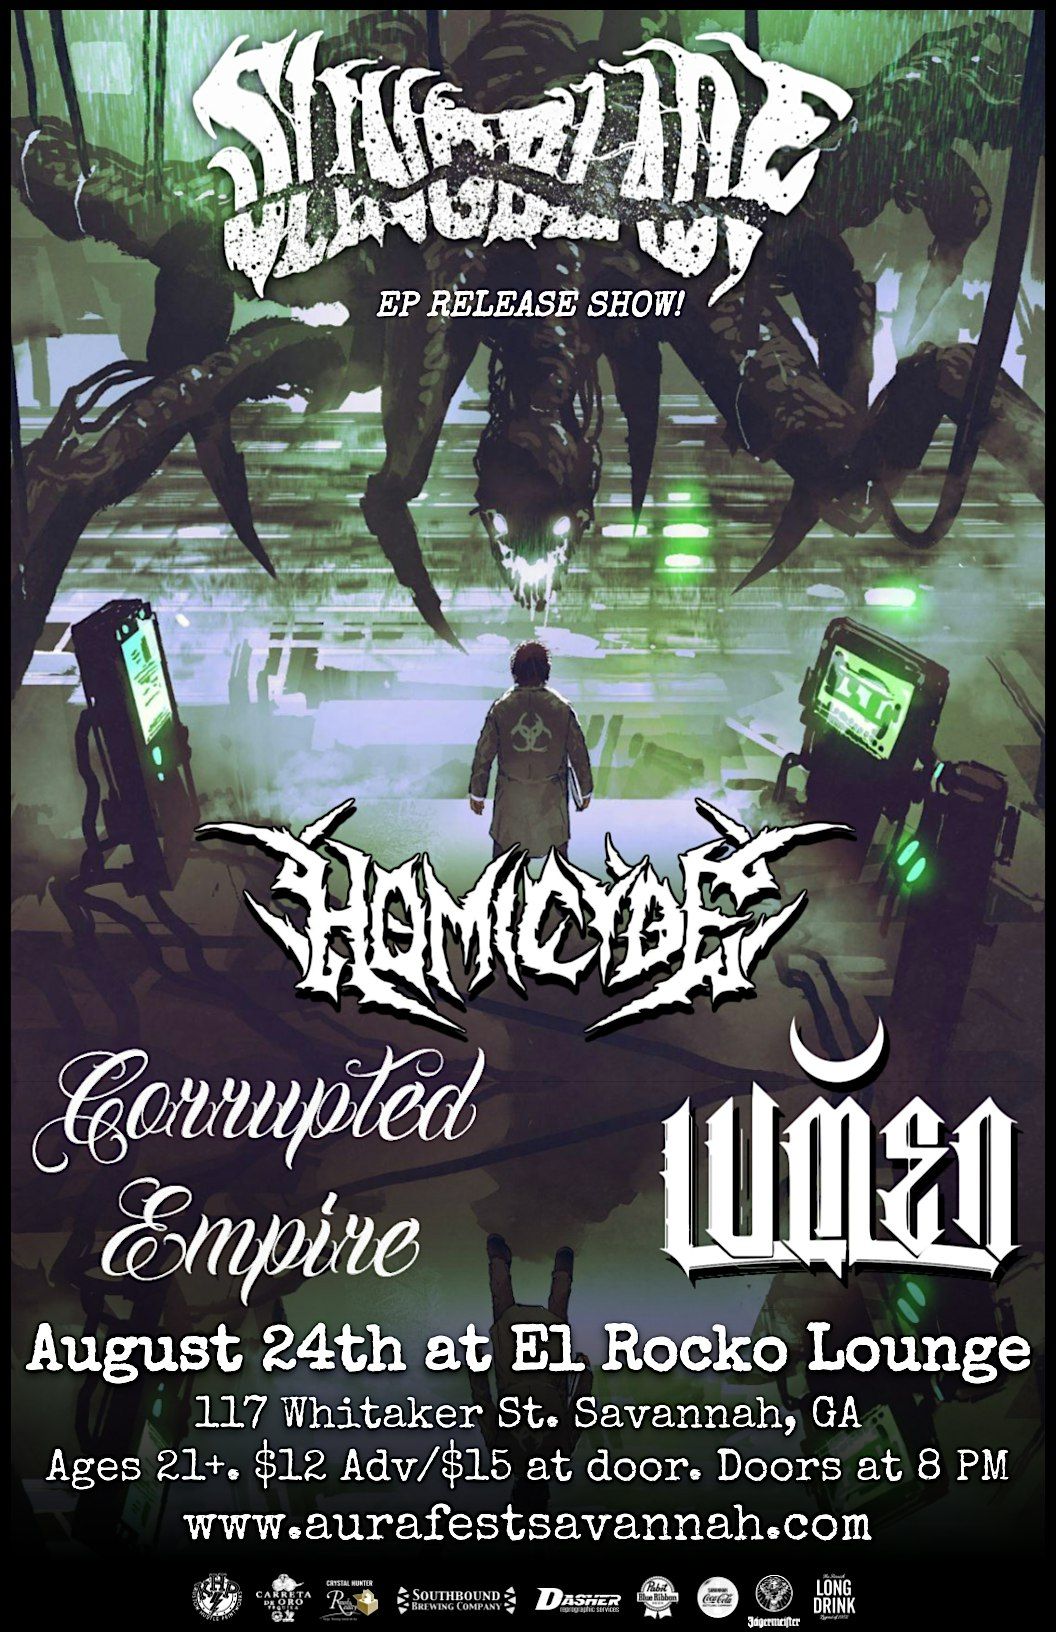 Slingblade (EP Release Show), with Homicyde, Corrupted Empire, Lumen